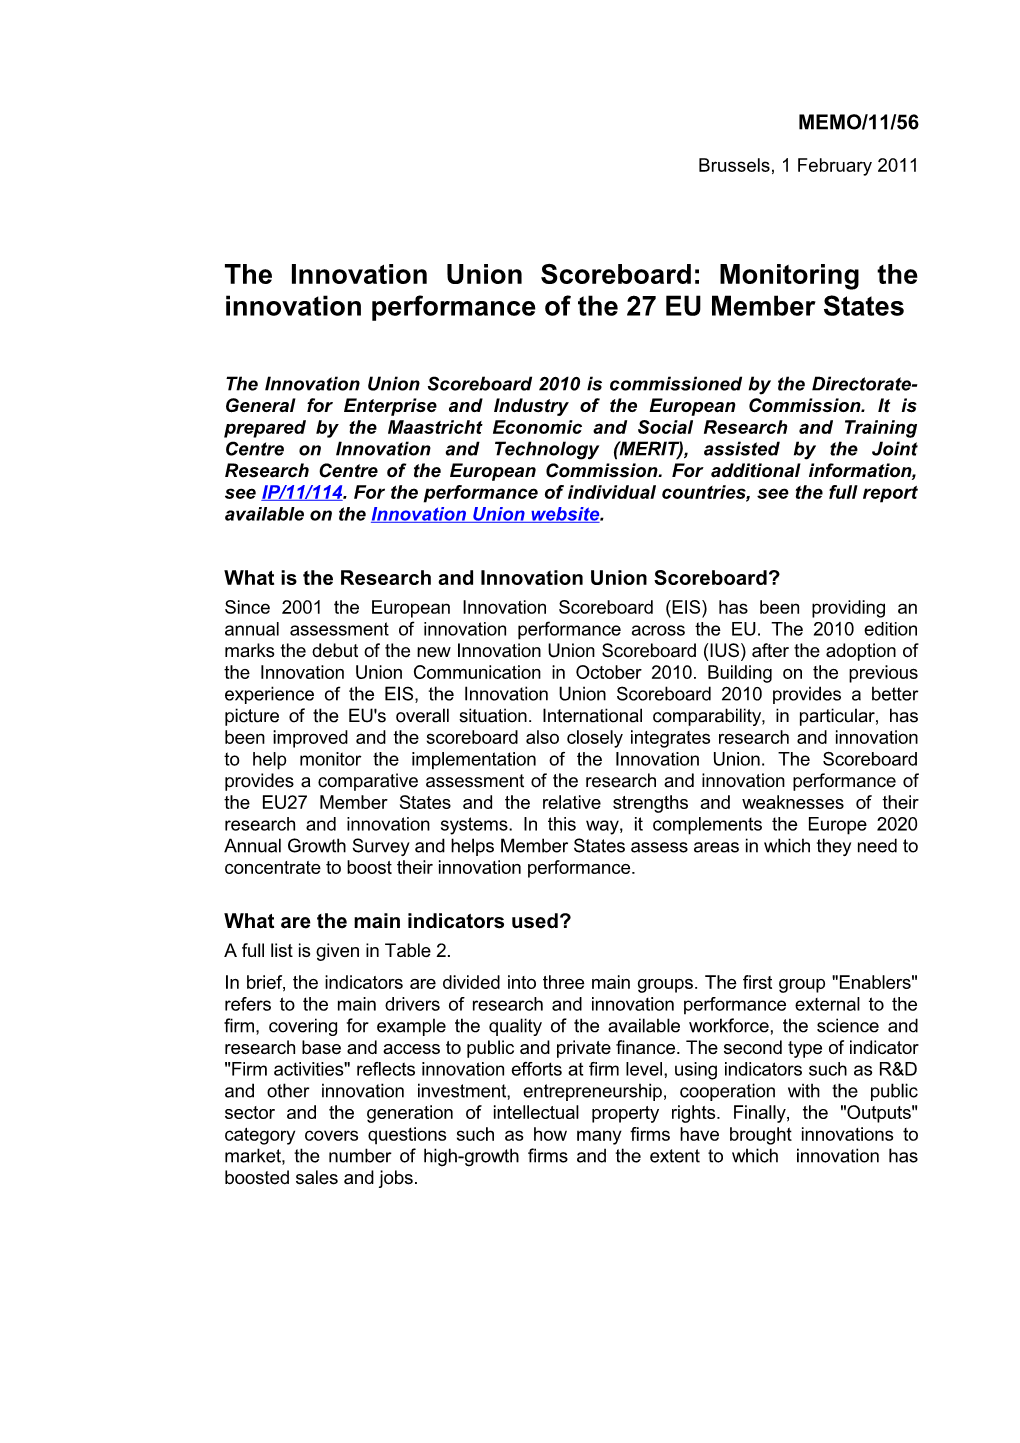 The Innovation Union Scoreboard: Monitoring the Innovation Performance of the 27EU Member